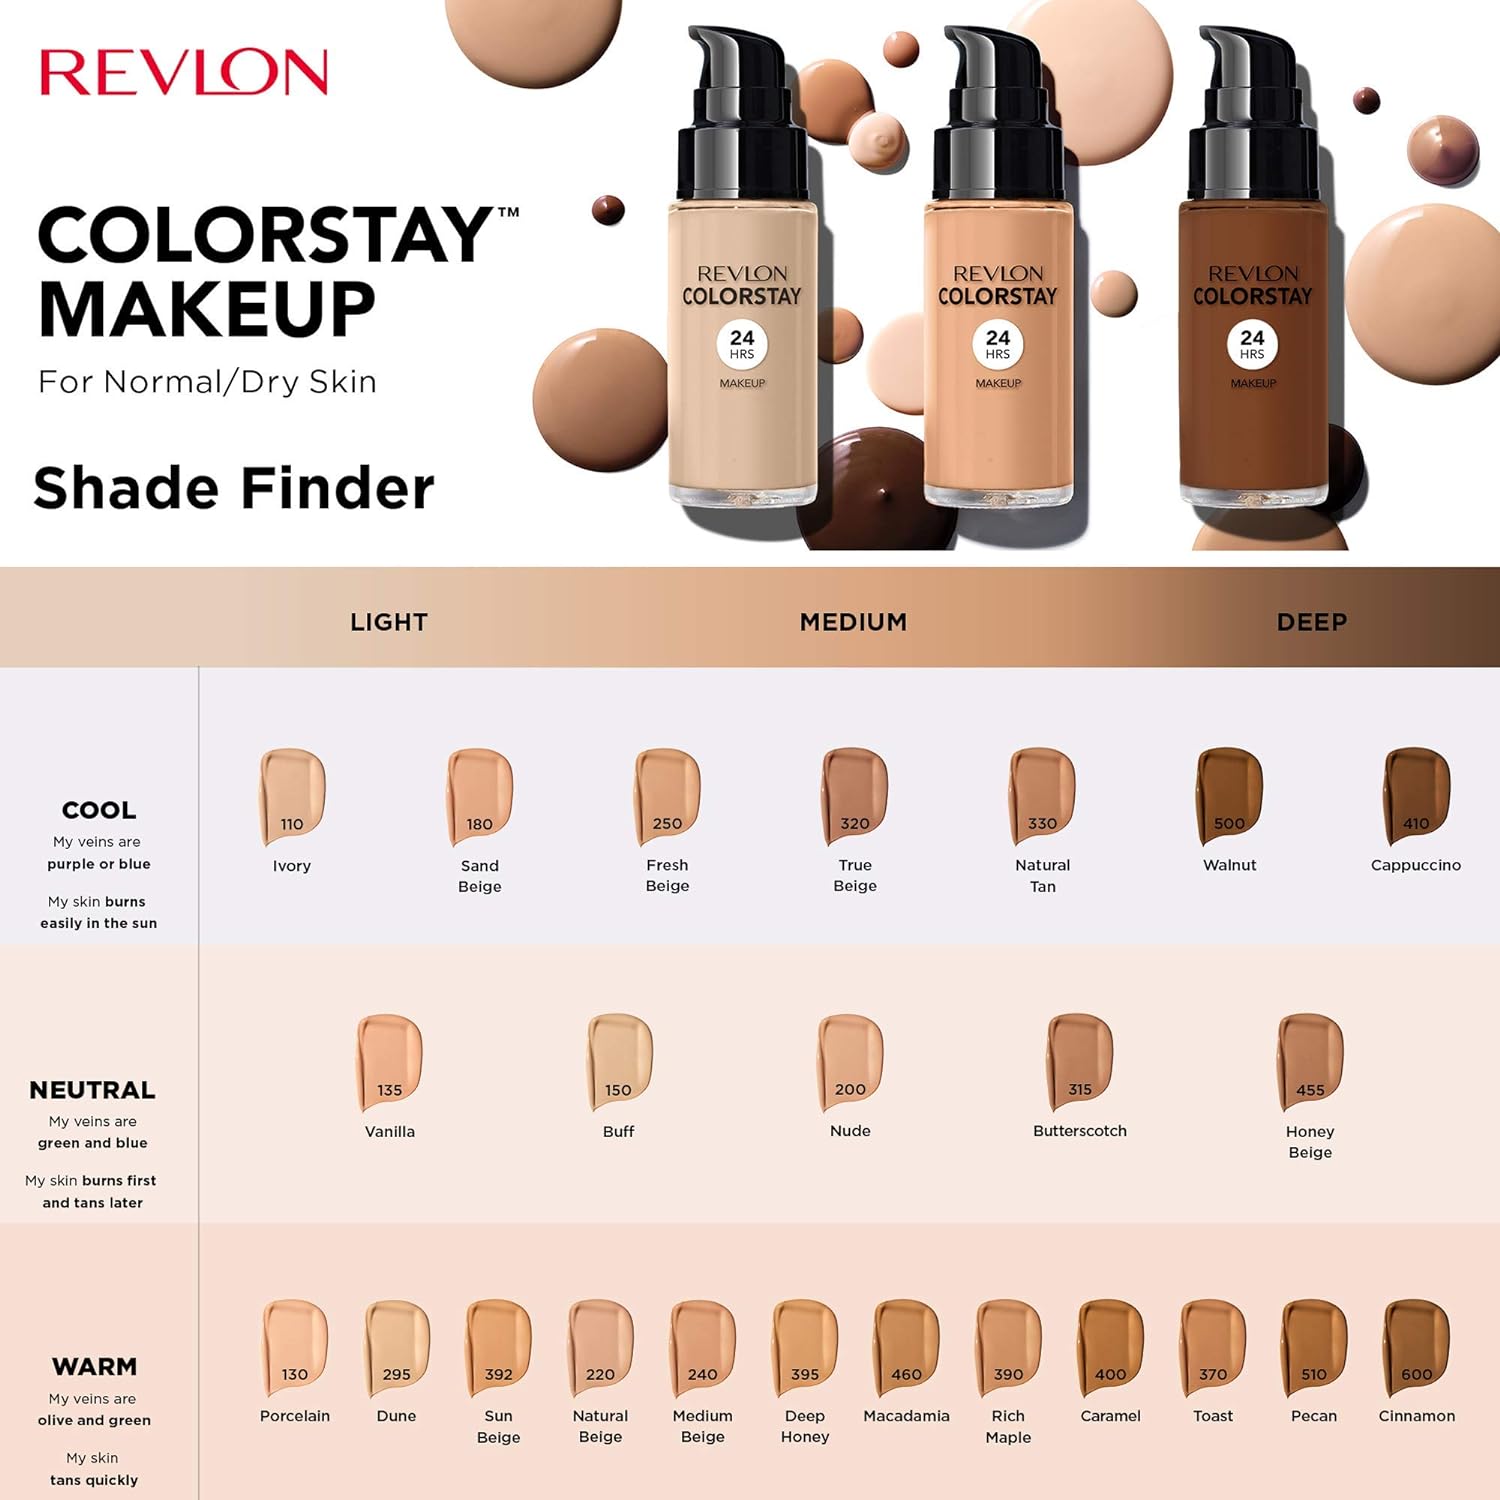 Revlon ColorStay Foundation SPF 20 for normal to dry skin - 330 Natural Tan 30ml